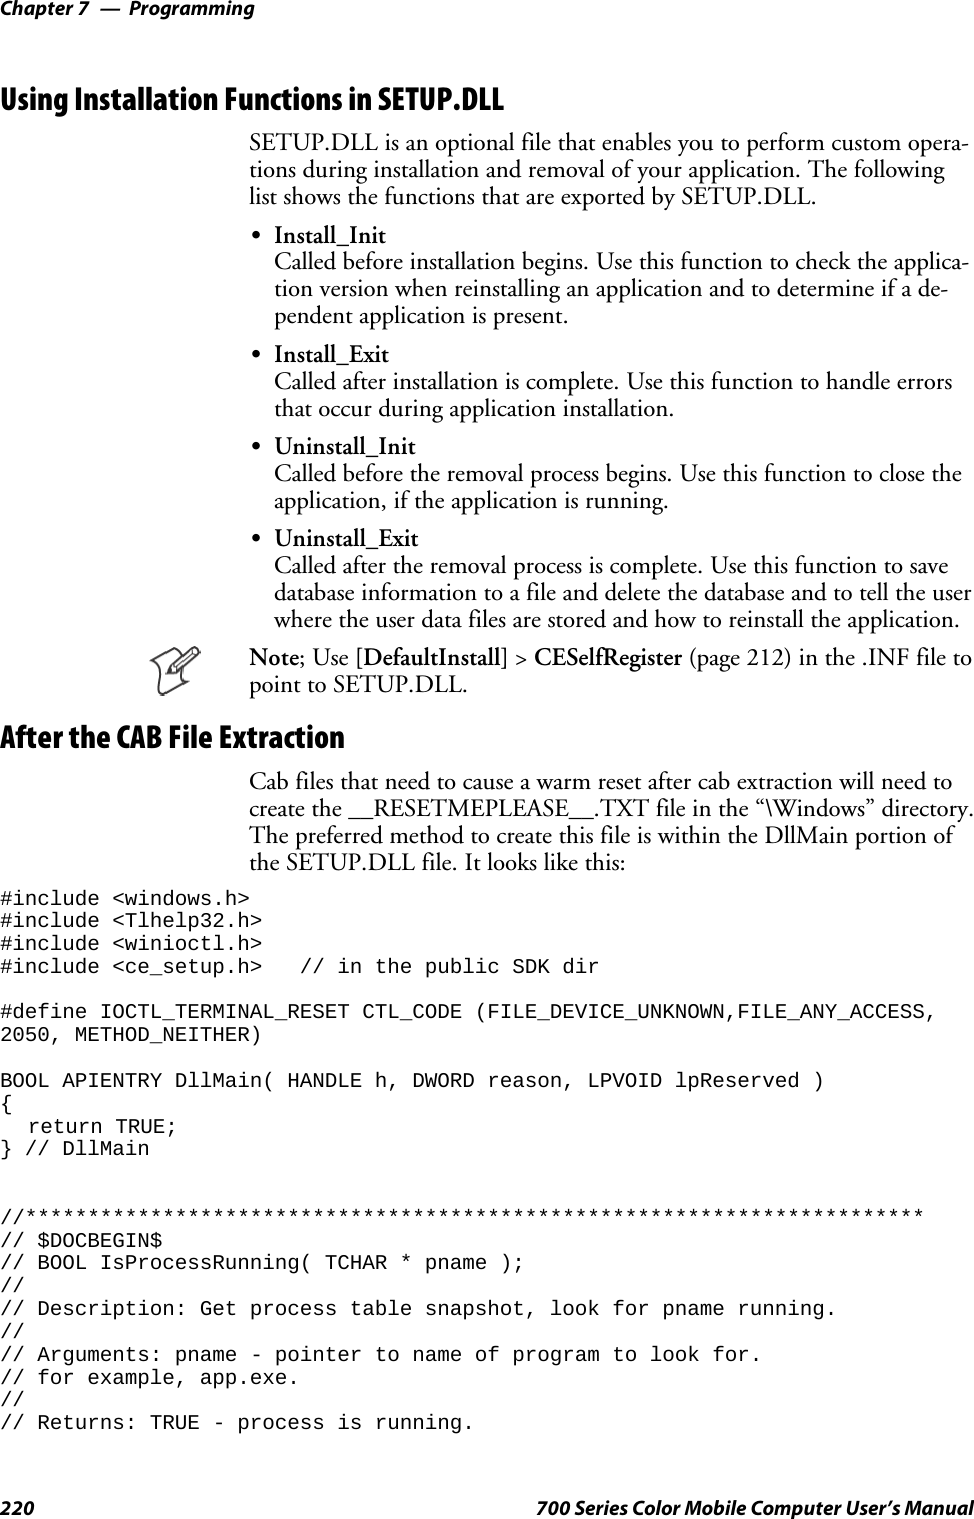 ProgrammingChapter —7220 700 Series Color Mobile Computer User’s ManualUsing Installation Functions in SETUP.DLLSETUP.DLL is an optional file that enables you to perform custom opera-tions during installation and removal of your application. The followinglist shows the functions that are exported by SETUP.DLL.SInstall_InitCalled before installation begins. Use this function to check the applica-tion version when reinstalling an application and to determine if a de-pendent application is present.SInstall_ExitCalled after installation is complete. Use this function to handle errorsthat occur during application installation.SUninstall_InitCalled before the removal process begins. Use this function to close theapplication, if the application is running.SUninstall_ExitCalled after the removal process is complete. Use this function to savedatabase information to a file and delete the database and to tell the userwhere the user data files are stored and how to reinstall the application.Note;Use[DefaultInstall] &gt;CESelfRegister (page 212) in the .INF file topoint to SETUP.DLL.After the CAB File ExtractionCab files that need to cause a warm reset after cab extraction will need tocreate the __RESETMEPLEASE__.TXT file in the “\Windows” directory.The preferred method to create this file is within the DllMain portion ofthe SETUP.DLL file. It looks like this:#include &lt;windows.h&gt;#include &lt;Tlhelp32.h&gt;#include &lt;winioctl.h&gt;#include &lt;ce_setup.h&gt; // in the public SDK dir#define IOCTL_TERMINAL_RESET CTL_CODE (FILE_DEVICE_UNKNOWN,FILE_ANY_ACCESS,2050, METHOD_NEITHER)BOOL APIENTRY DllMain( HANDLE h, DWORD reason, LPVOID lpReserved ){return TRUE;} // DllMain//************************************************************************// $DOCBEGIN$// BOOL IsProcessRunning( TCHAR * pname );//// Description: Get process table snapshot, look for pname running.//// Arguments: pname - pointer to name of program to look for.// for example, app.exe.//// Returns: TRUE - process is running.